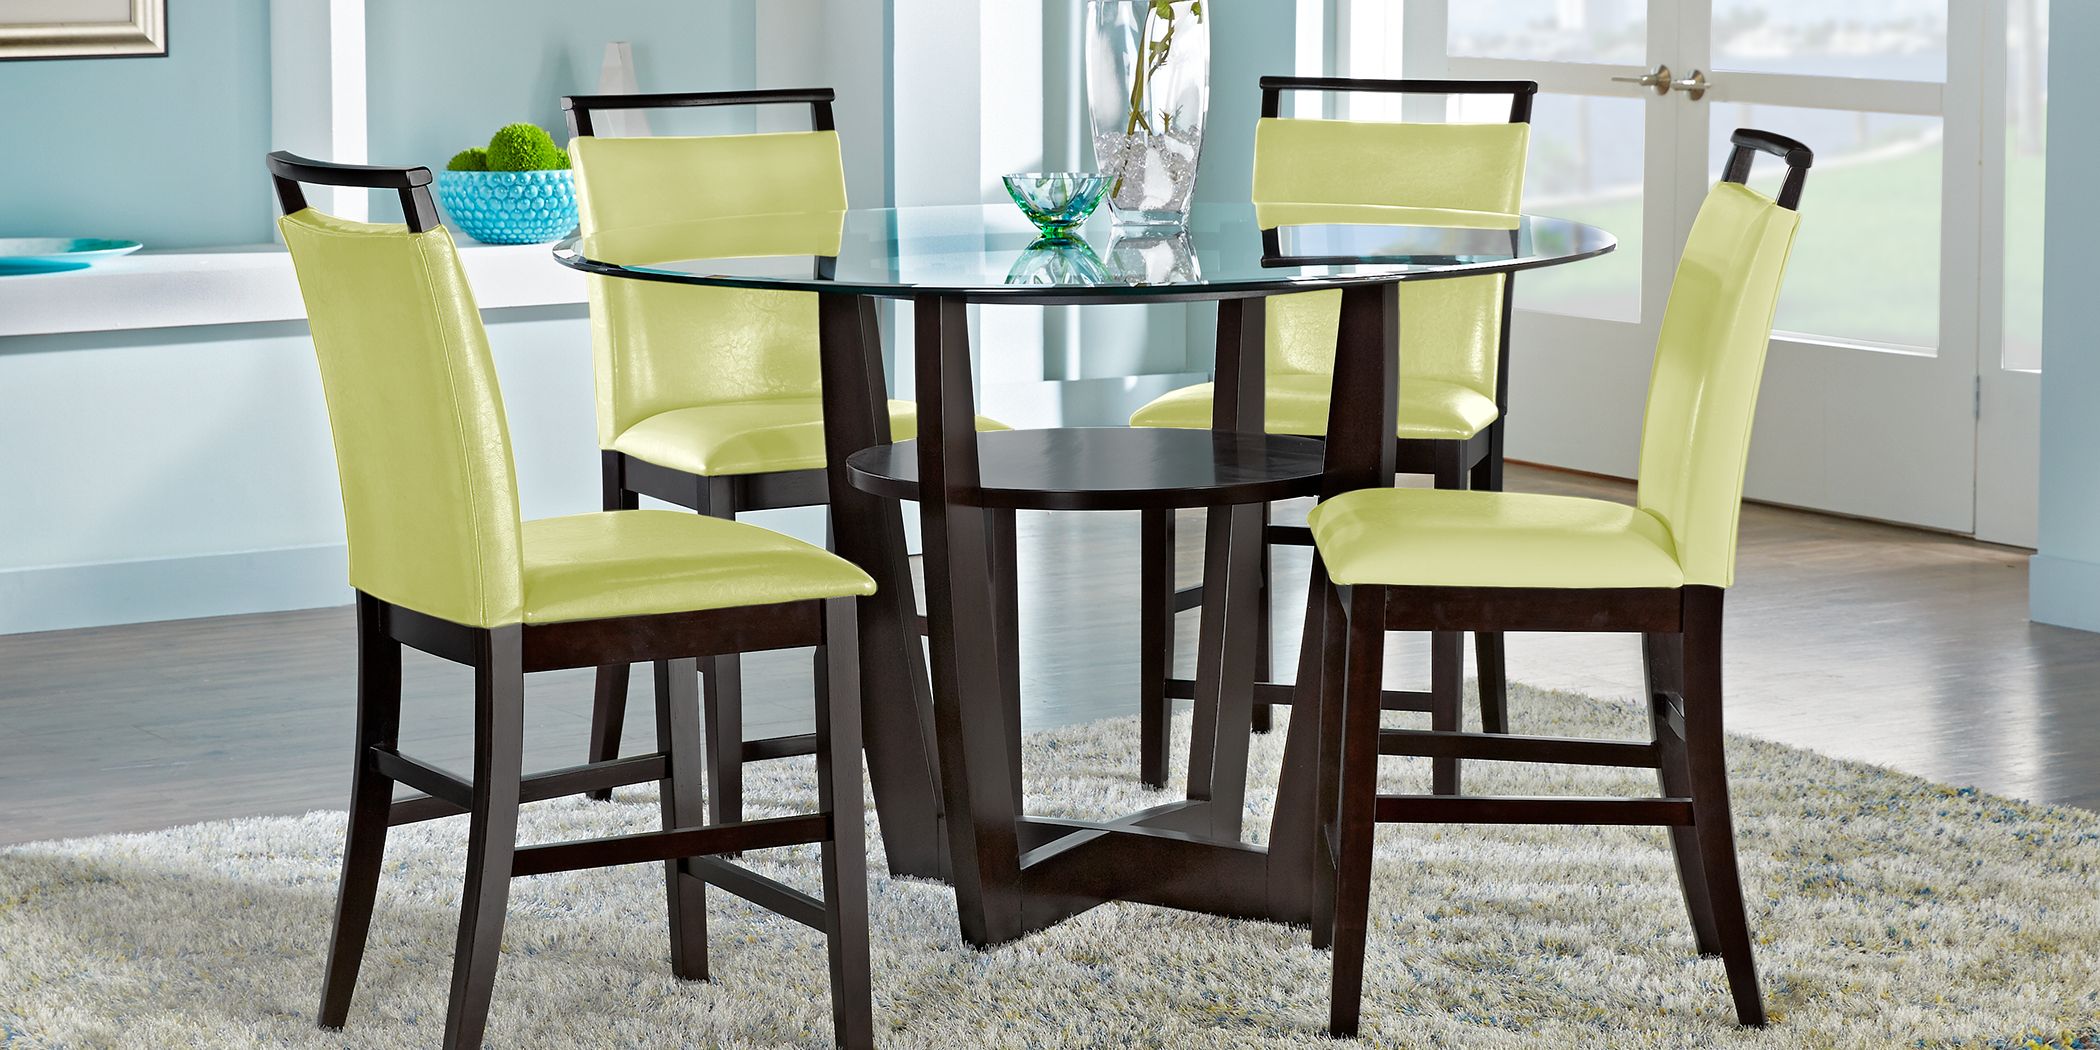 Chairs Black Glass Dining Room Sets, Glass And Wood Dining Room Table Set